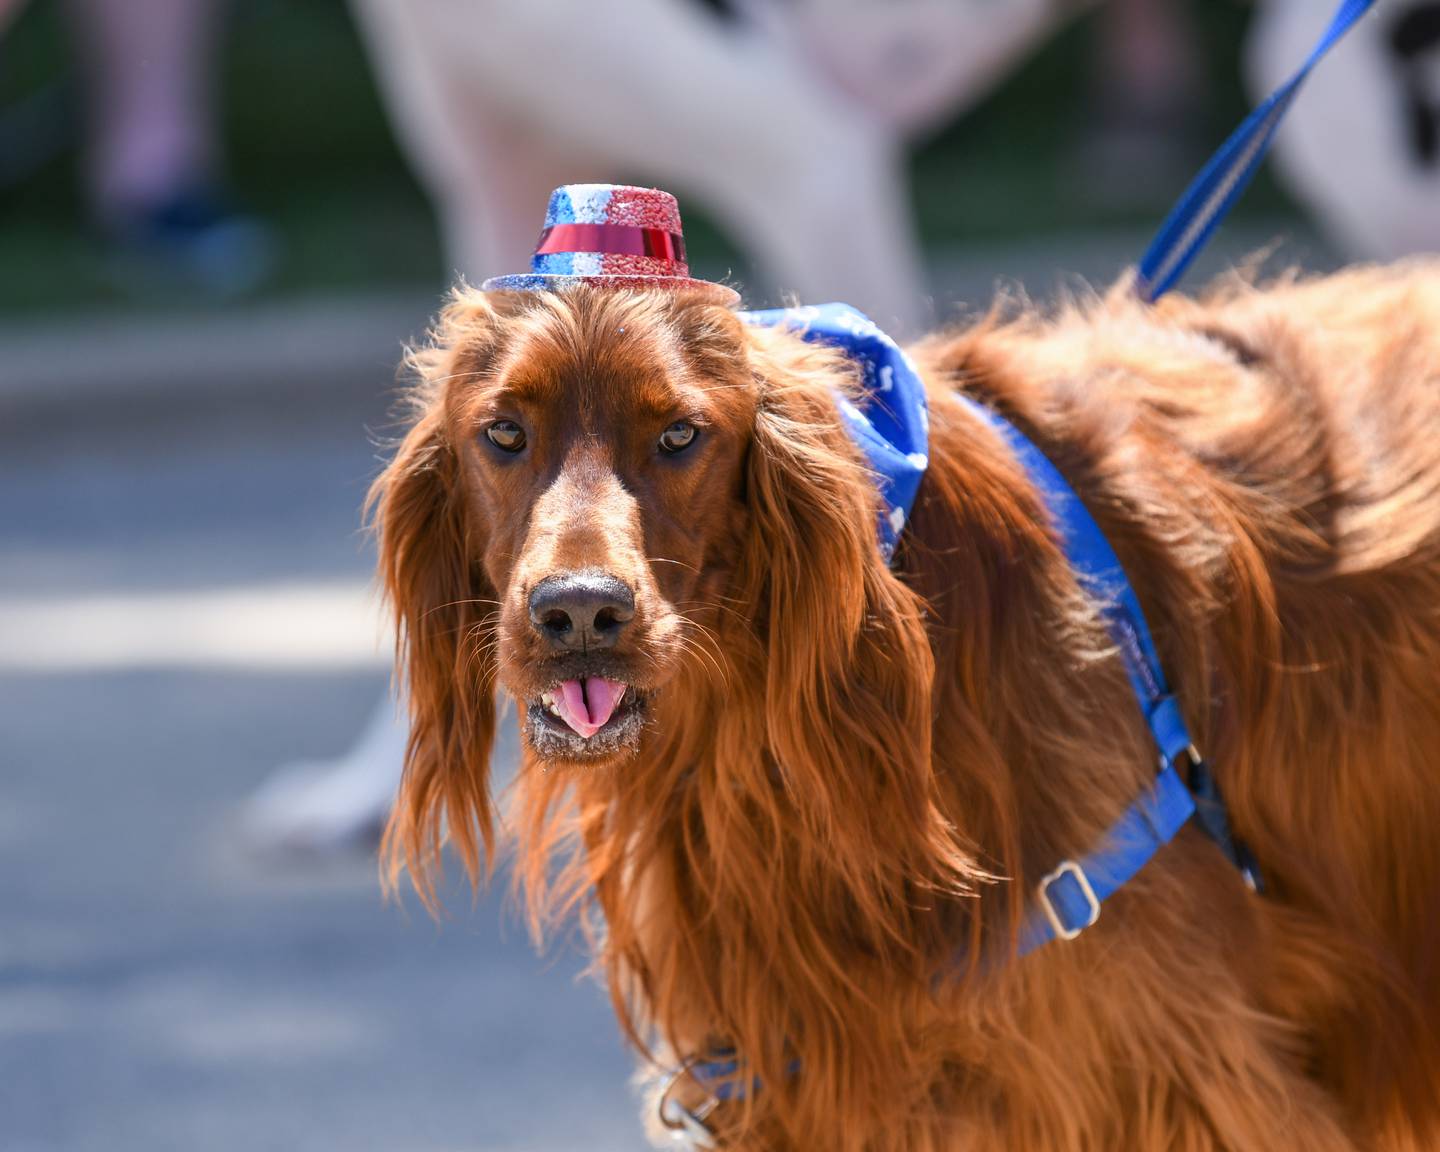 Storm, a 2 year old Irish Setter with all Mid-Day Play pet services, was all smiles in the Freedom Days Parade on Saturday July 2, 2022 in Sandwich.